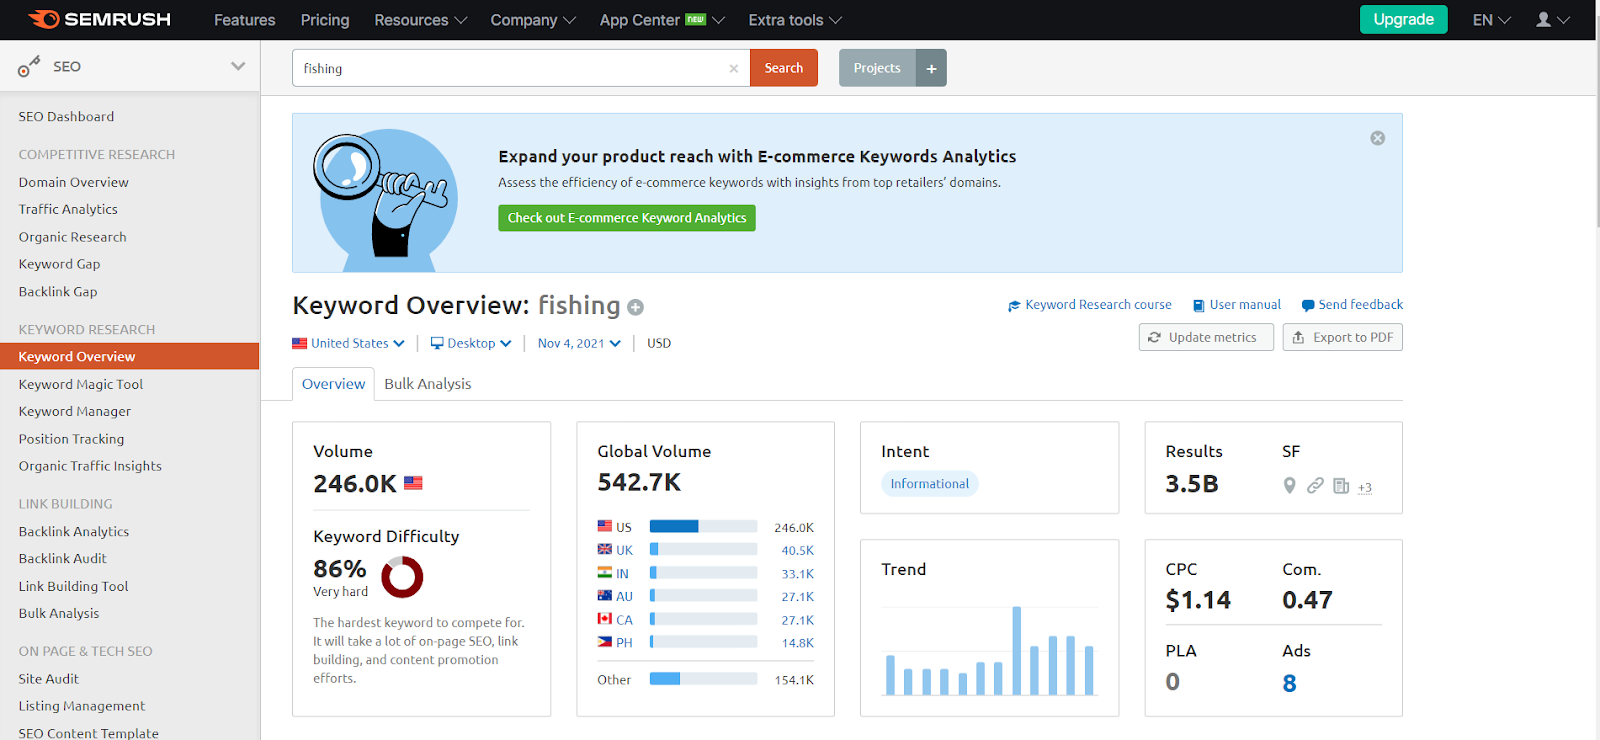 SEMRush showing the results of keyword search for “fishing”